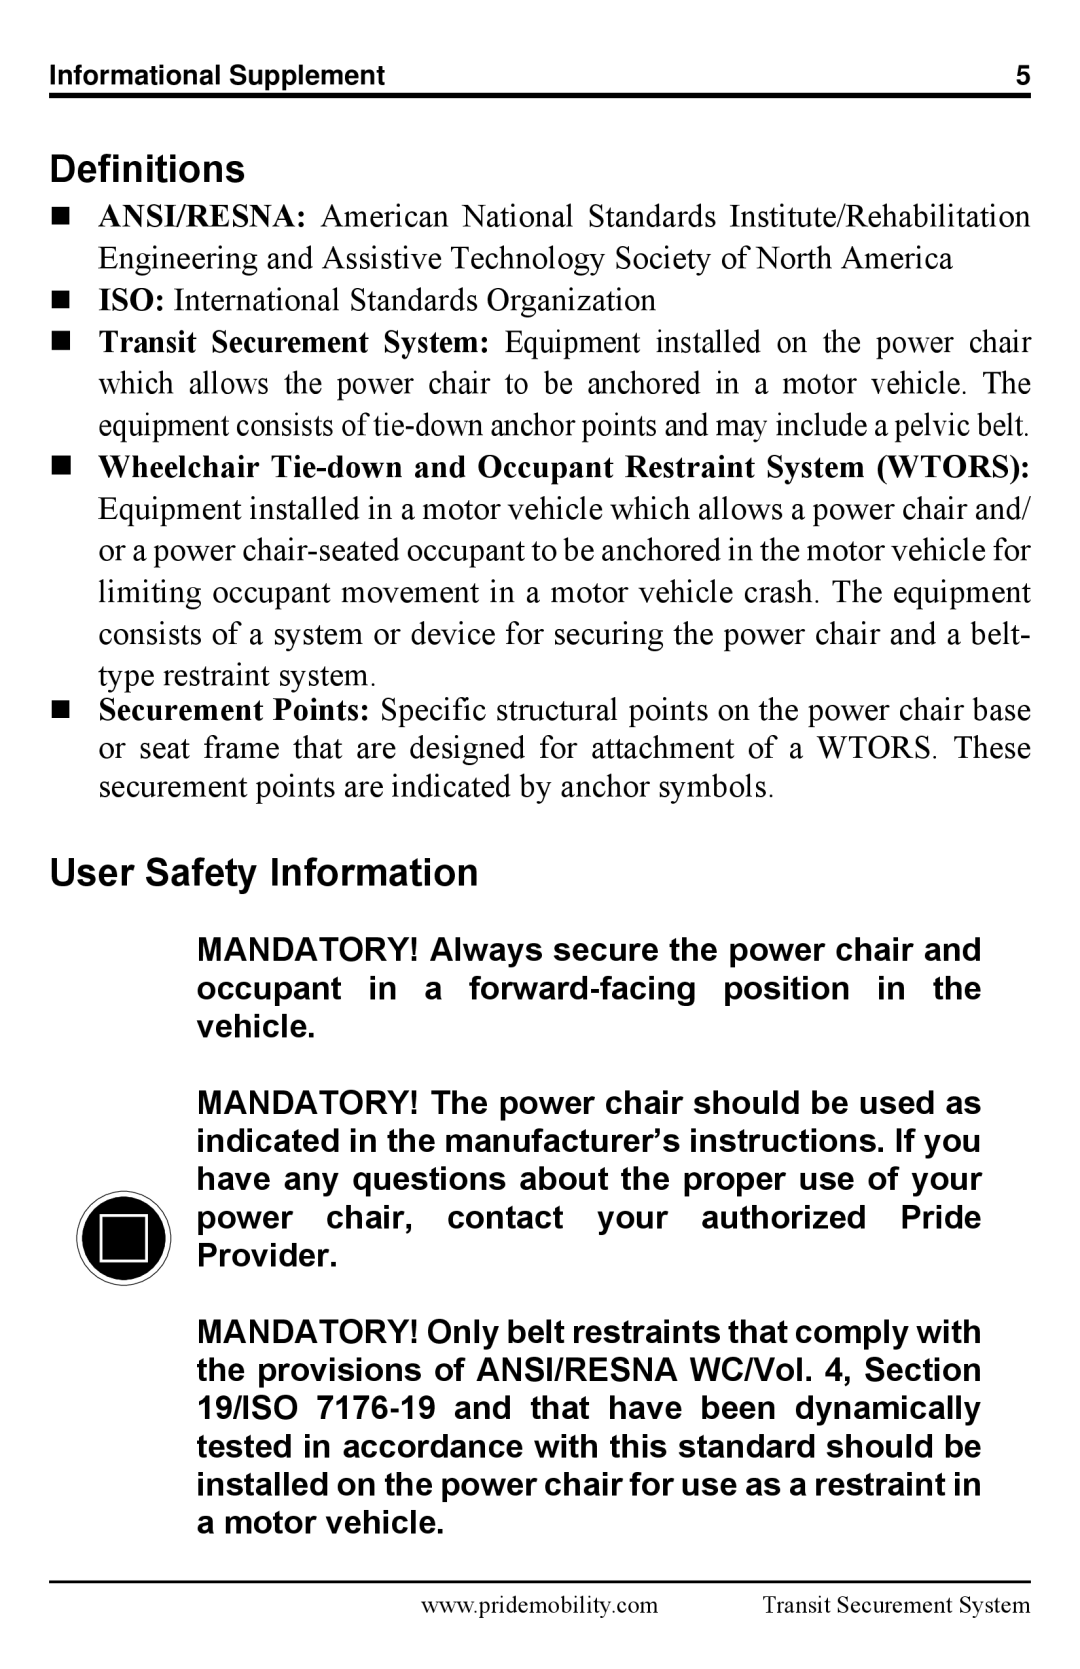 Pride Mobility Quantum 6000Z, Q6 Edge manual Definitions, User Safety Information 